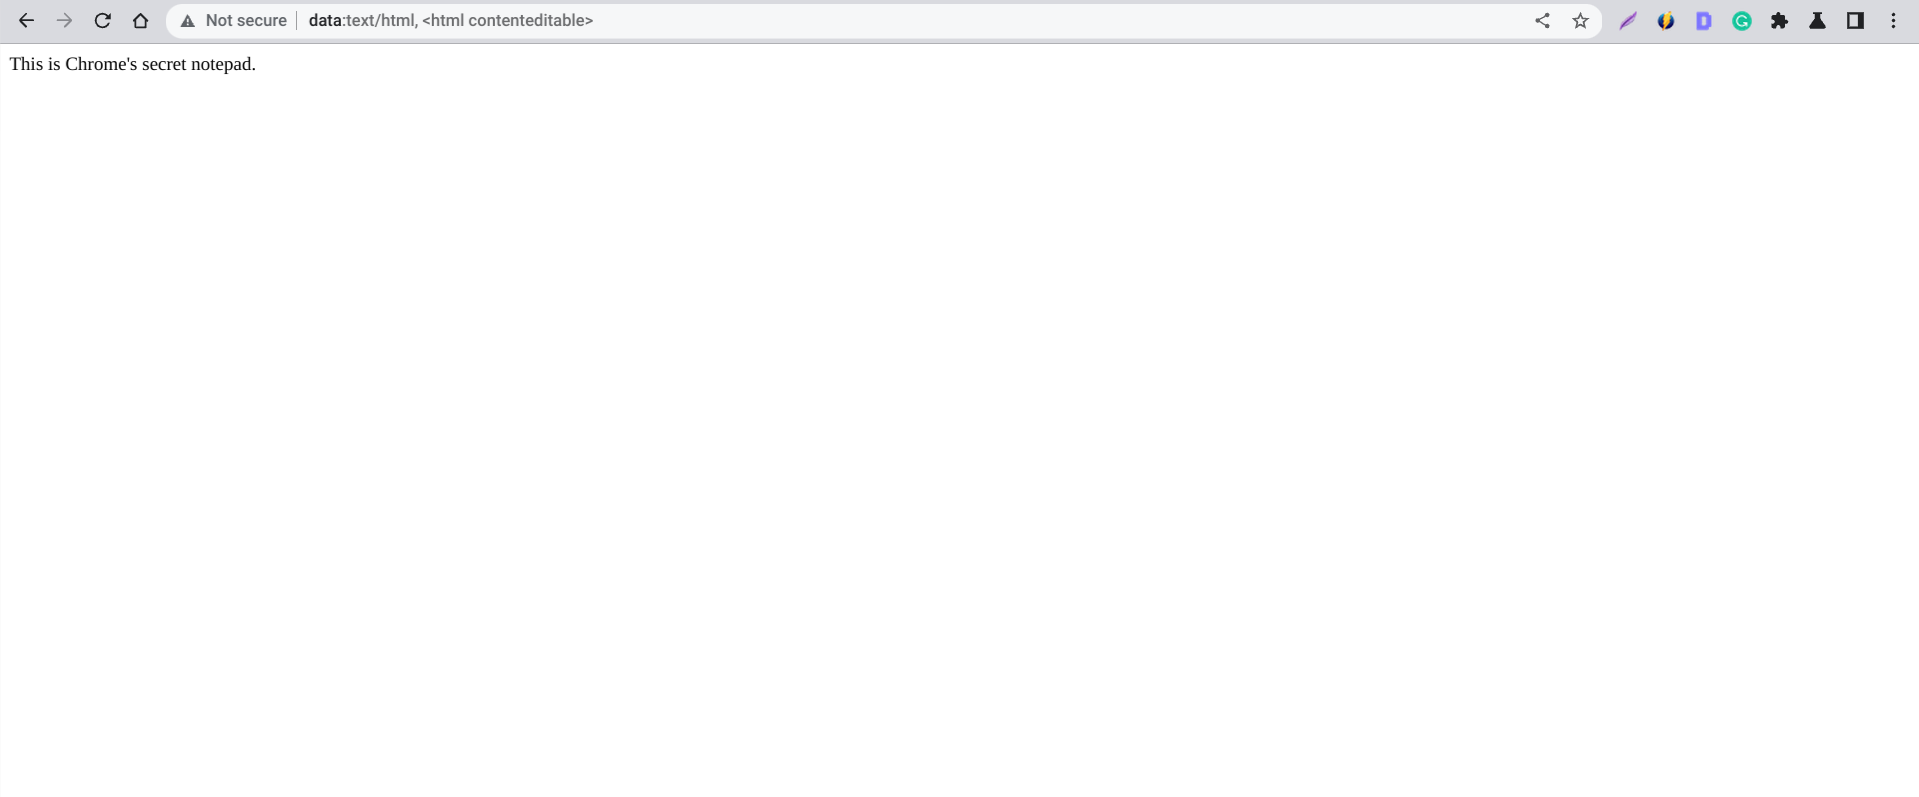 In-built notepad of the Chrome browser